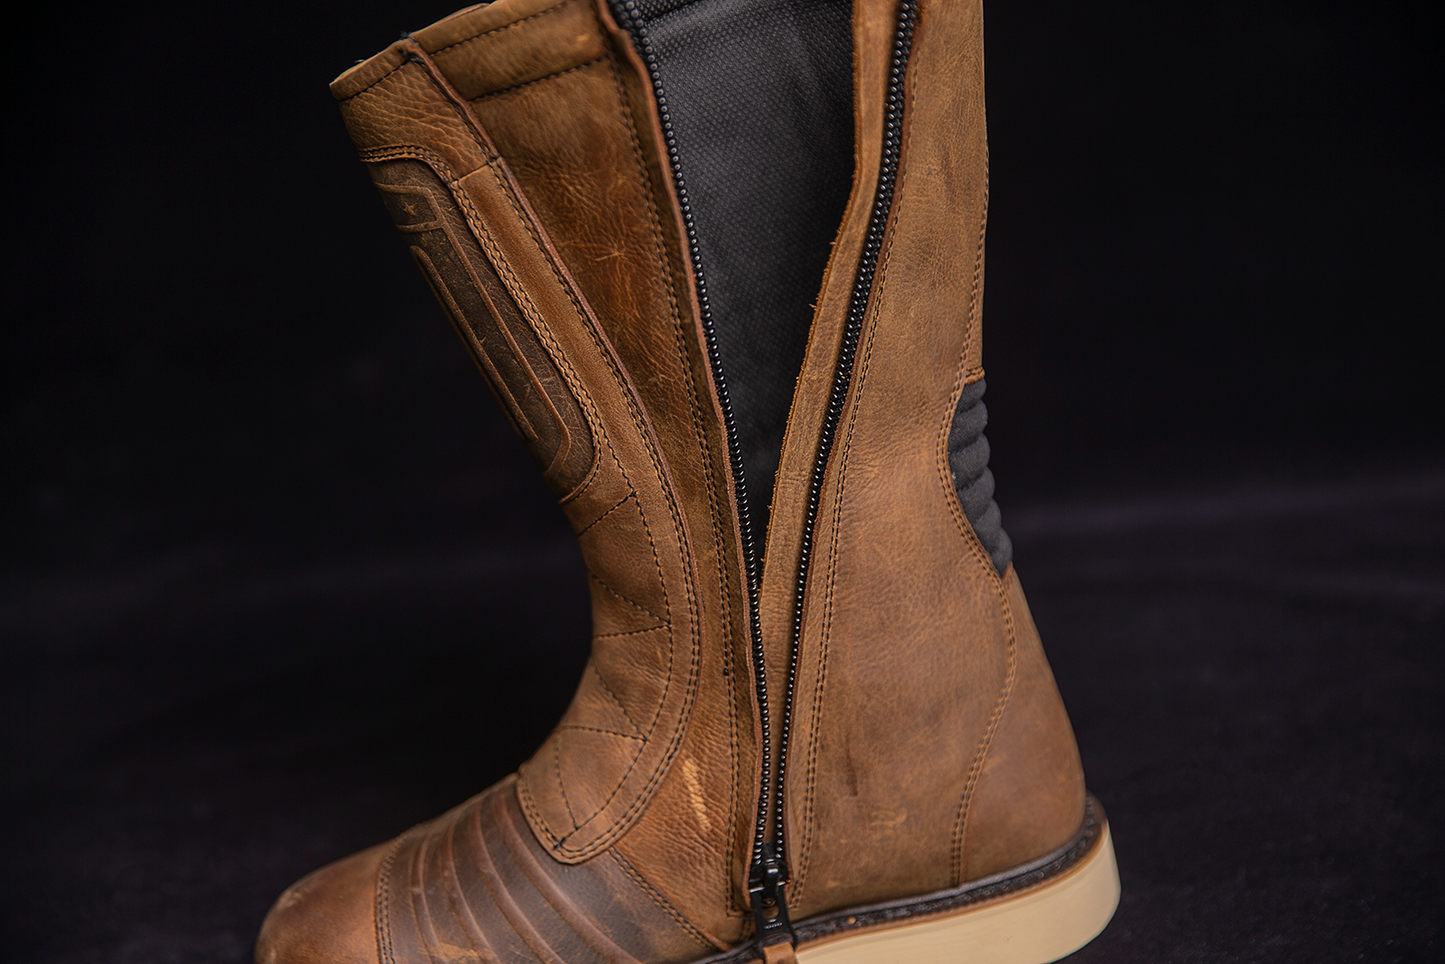 ICON Elsinore 2™ CE Boots - Brown - Size 8 3403-1221